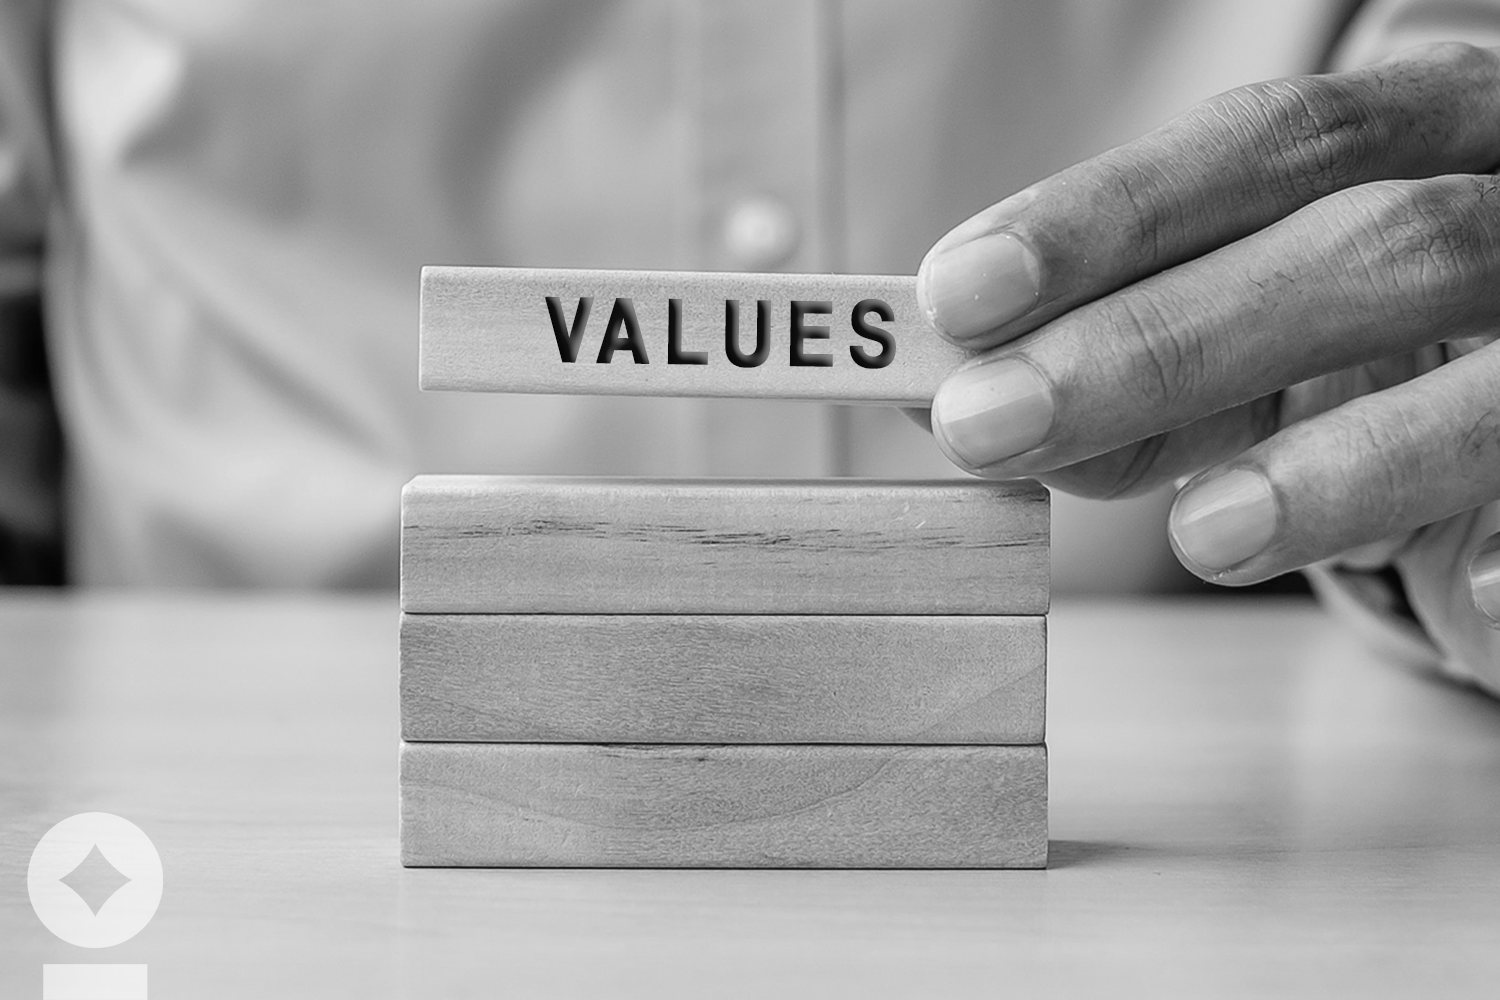 Valuing Your Values